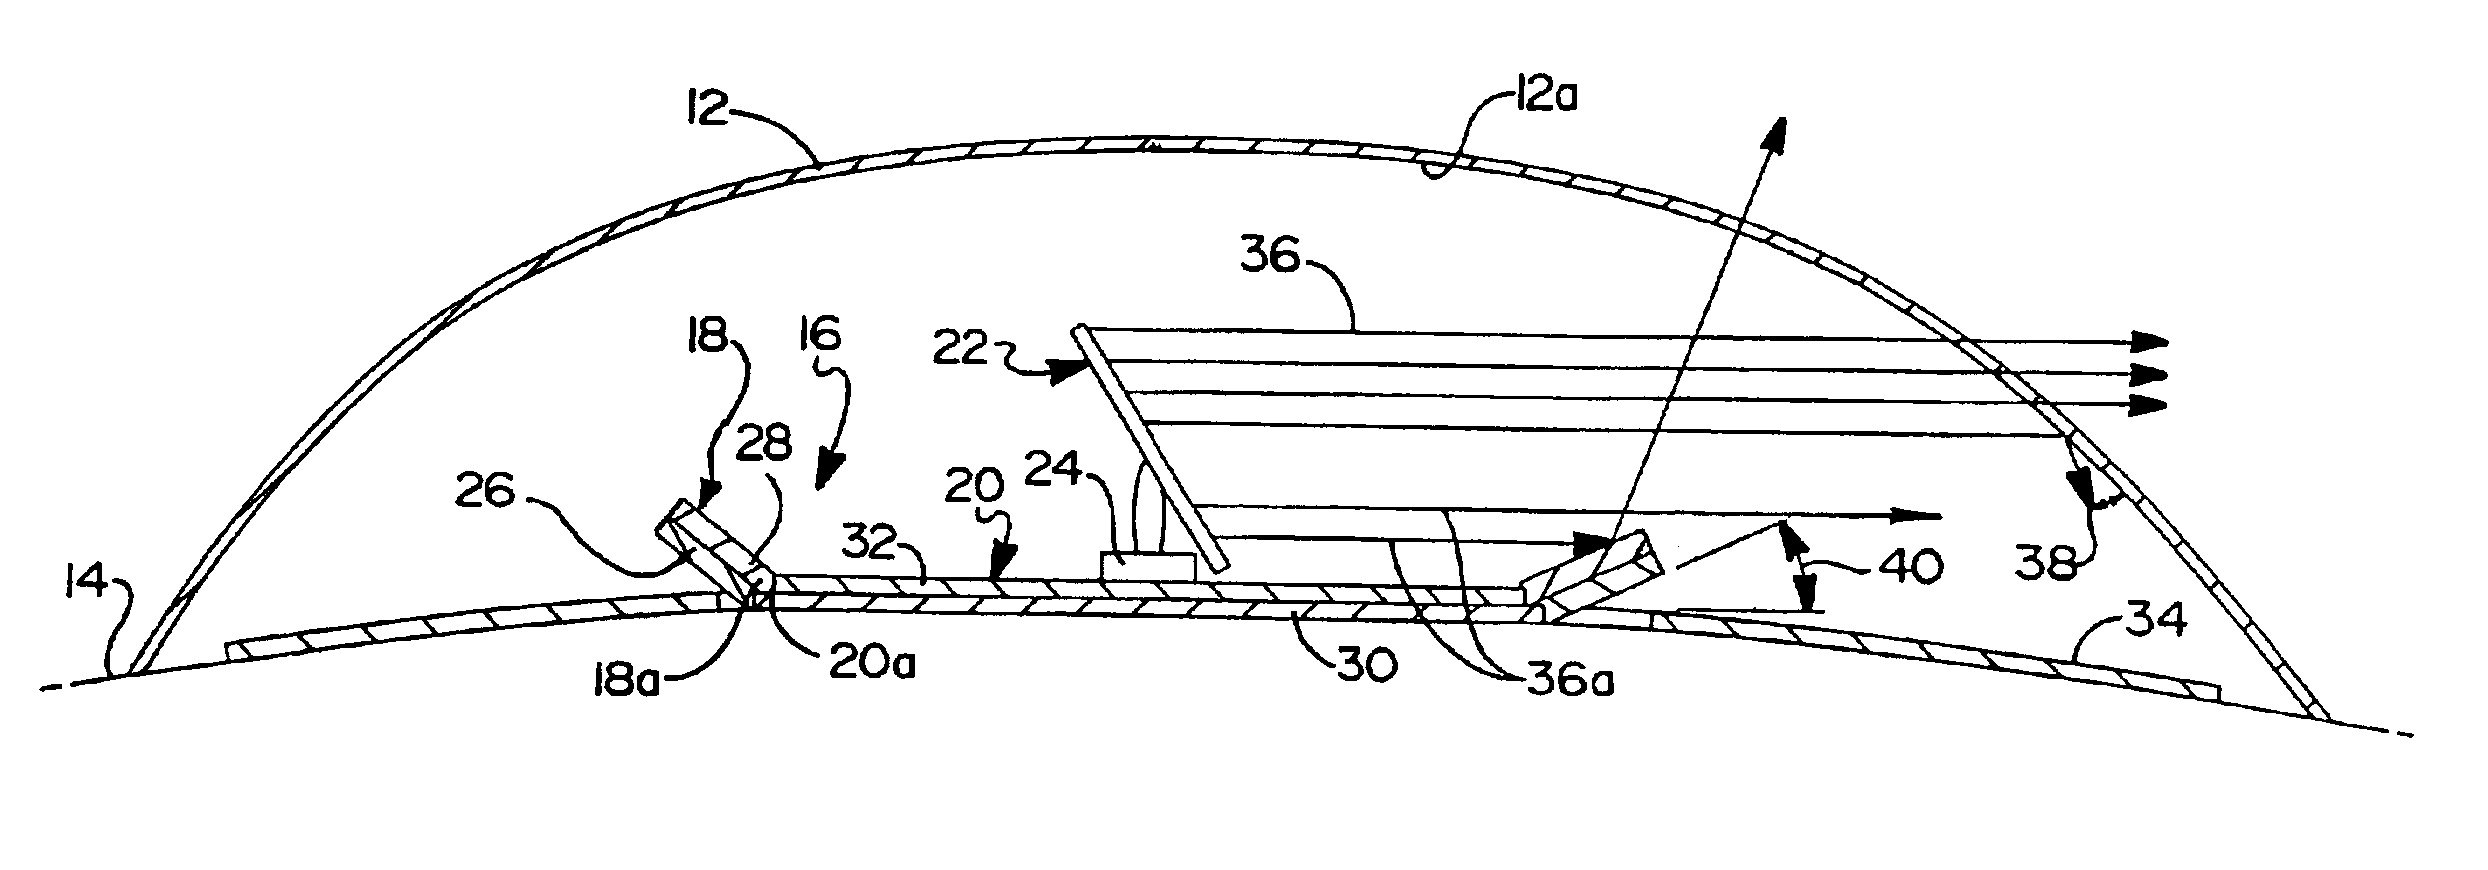 Attenuation apparatus for minimizing reflections of electromagnetic energy from an antenna disposed within a radome